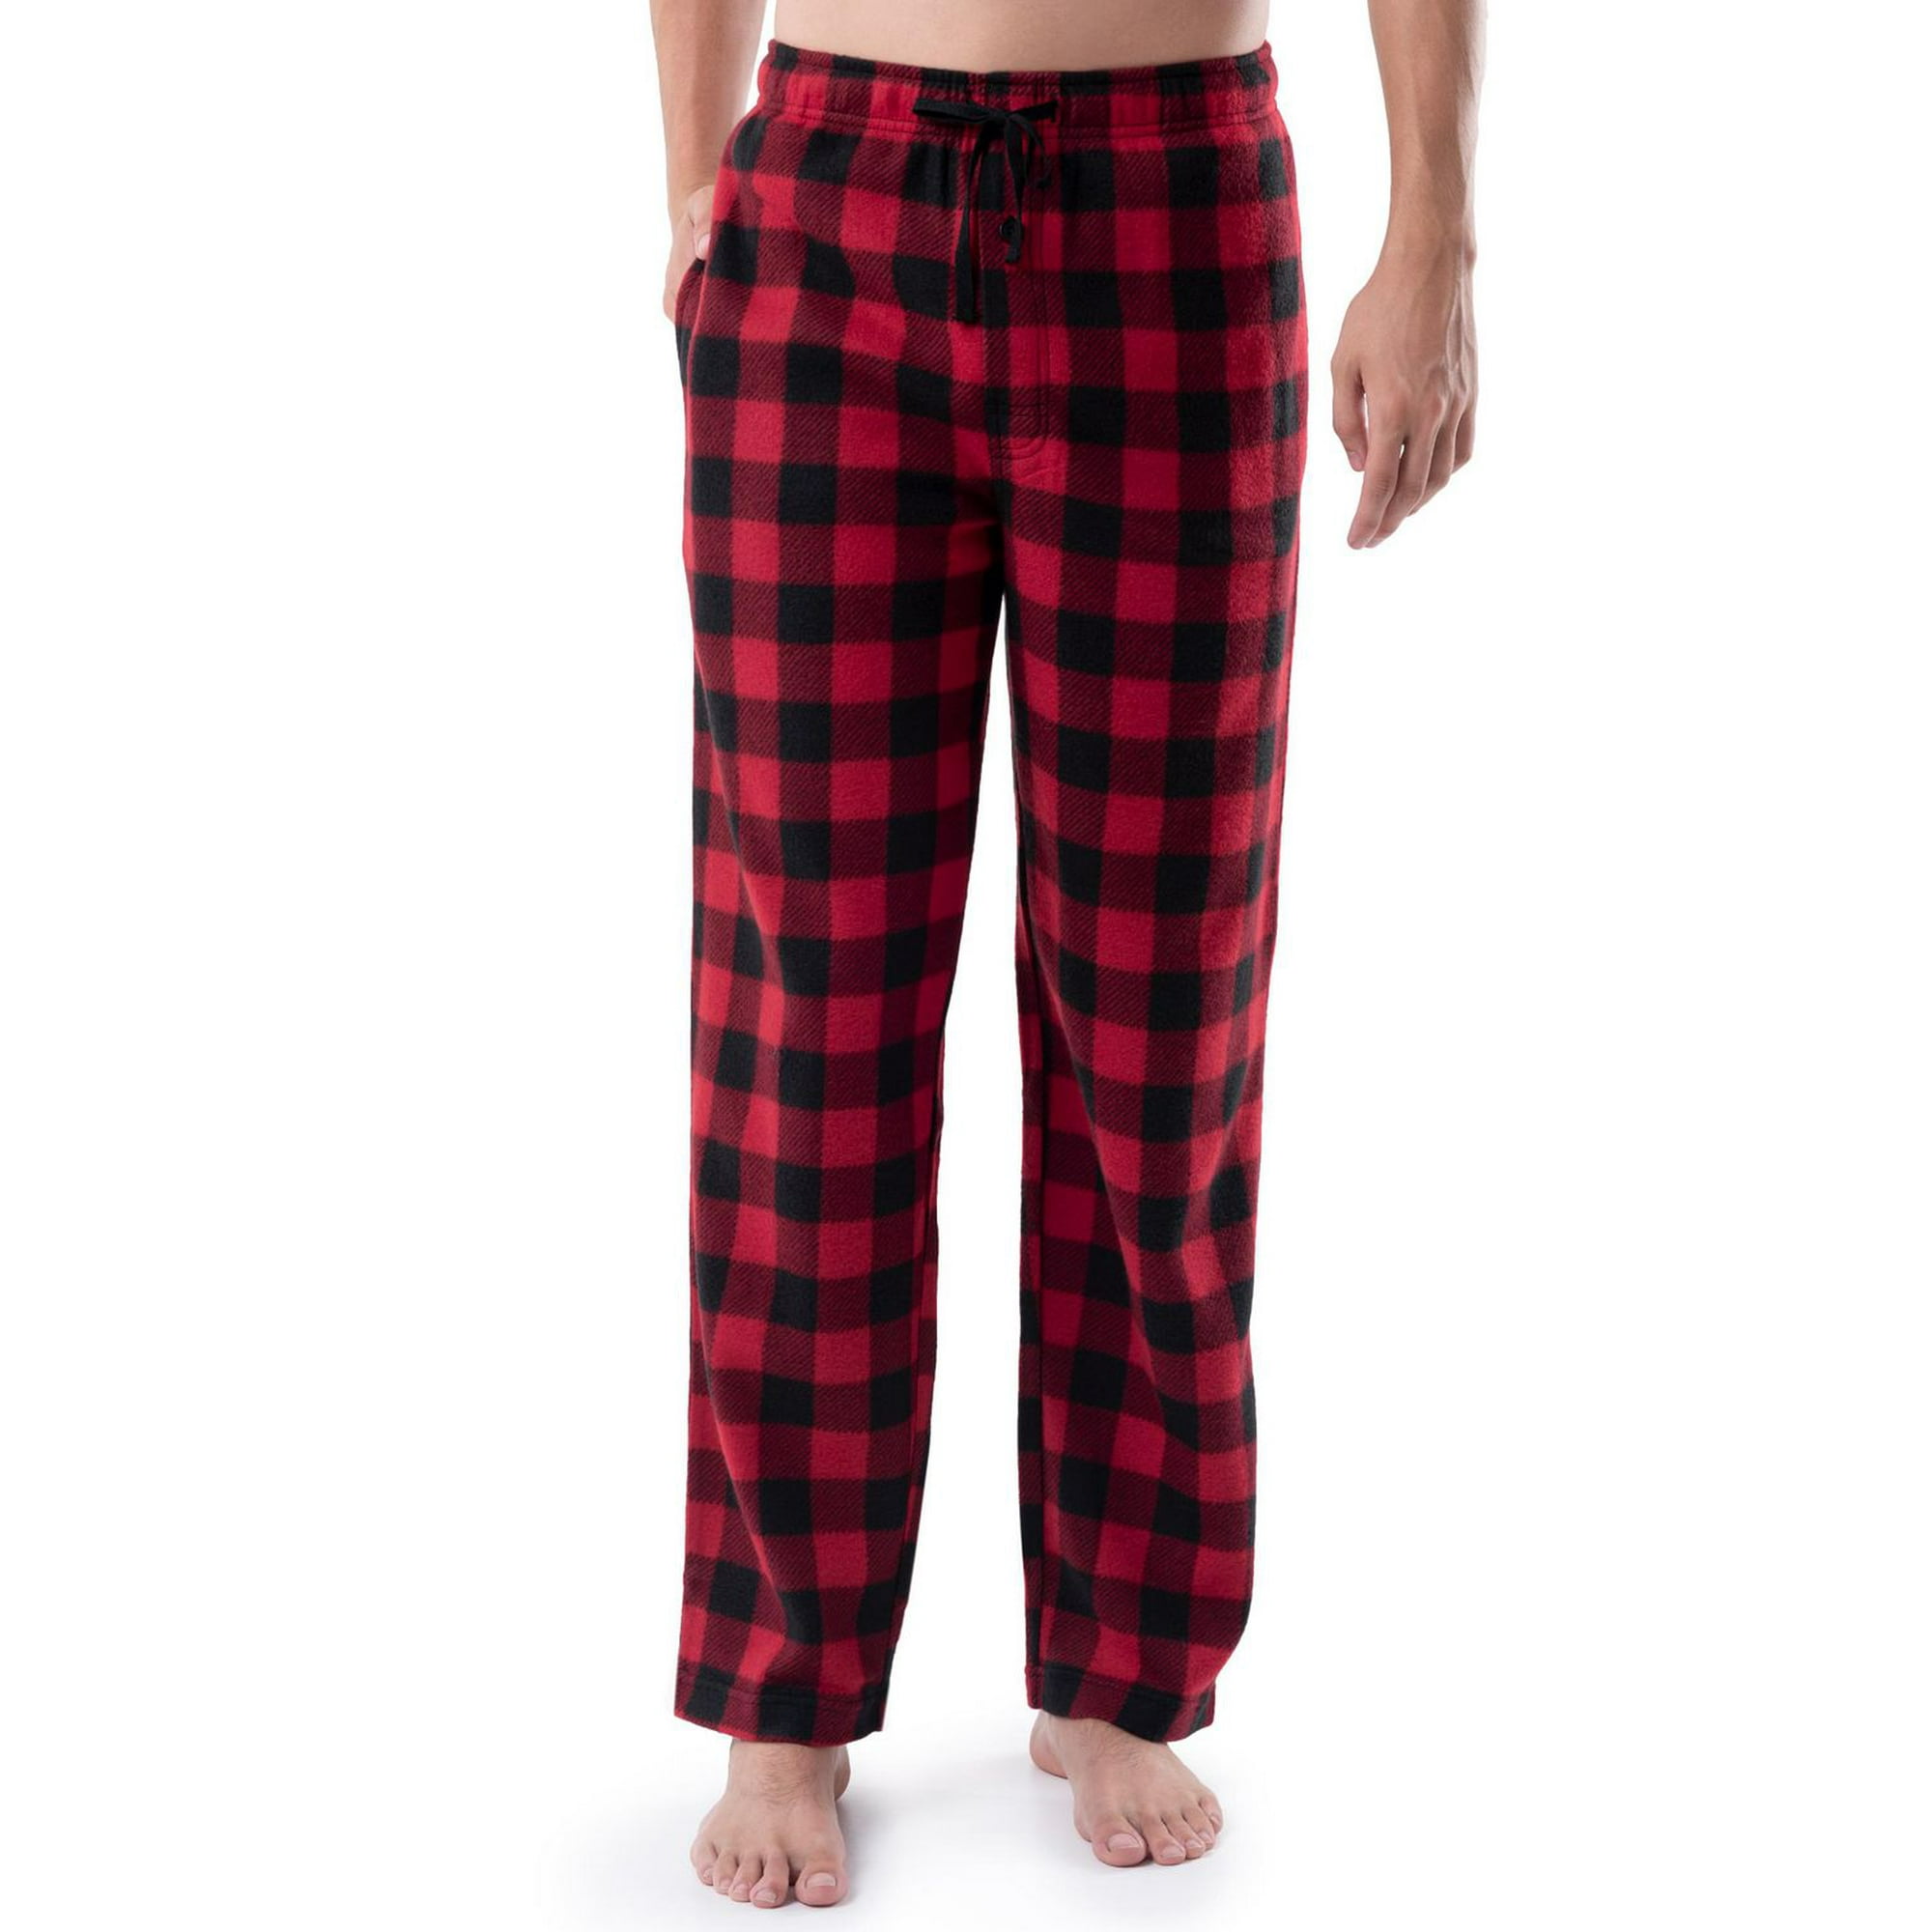 U.S. Polo Assn. Men's Pajama Pants - Ultra Soft Fleece Sleep and Lounge  Pants (Size S-XL), Size Small, Navy Multi Plaid at  Men's Clothing  store